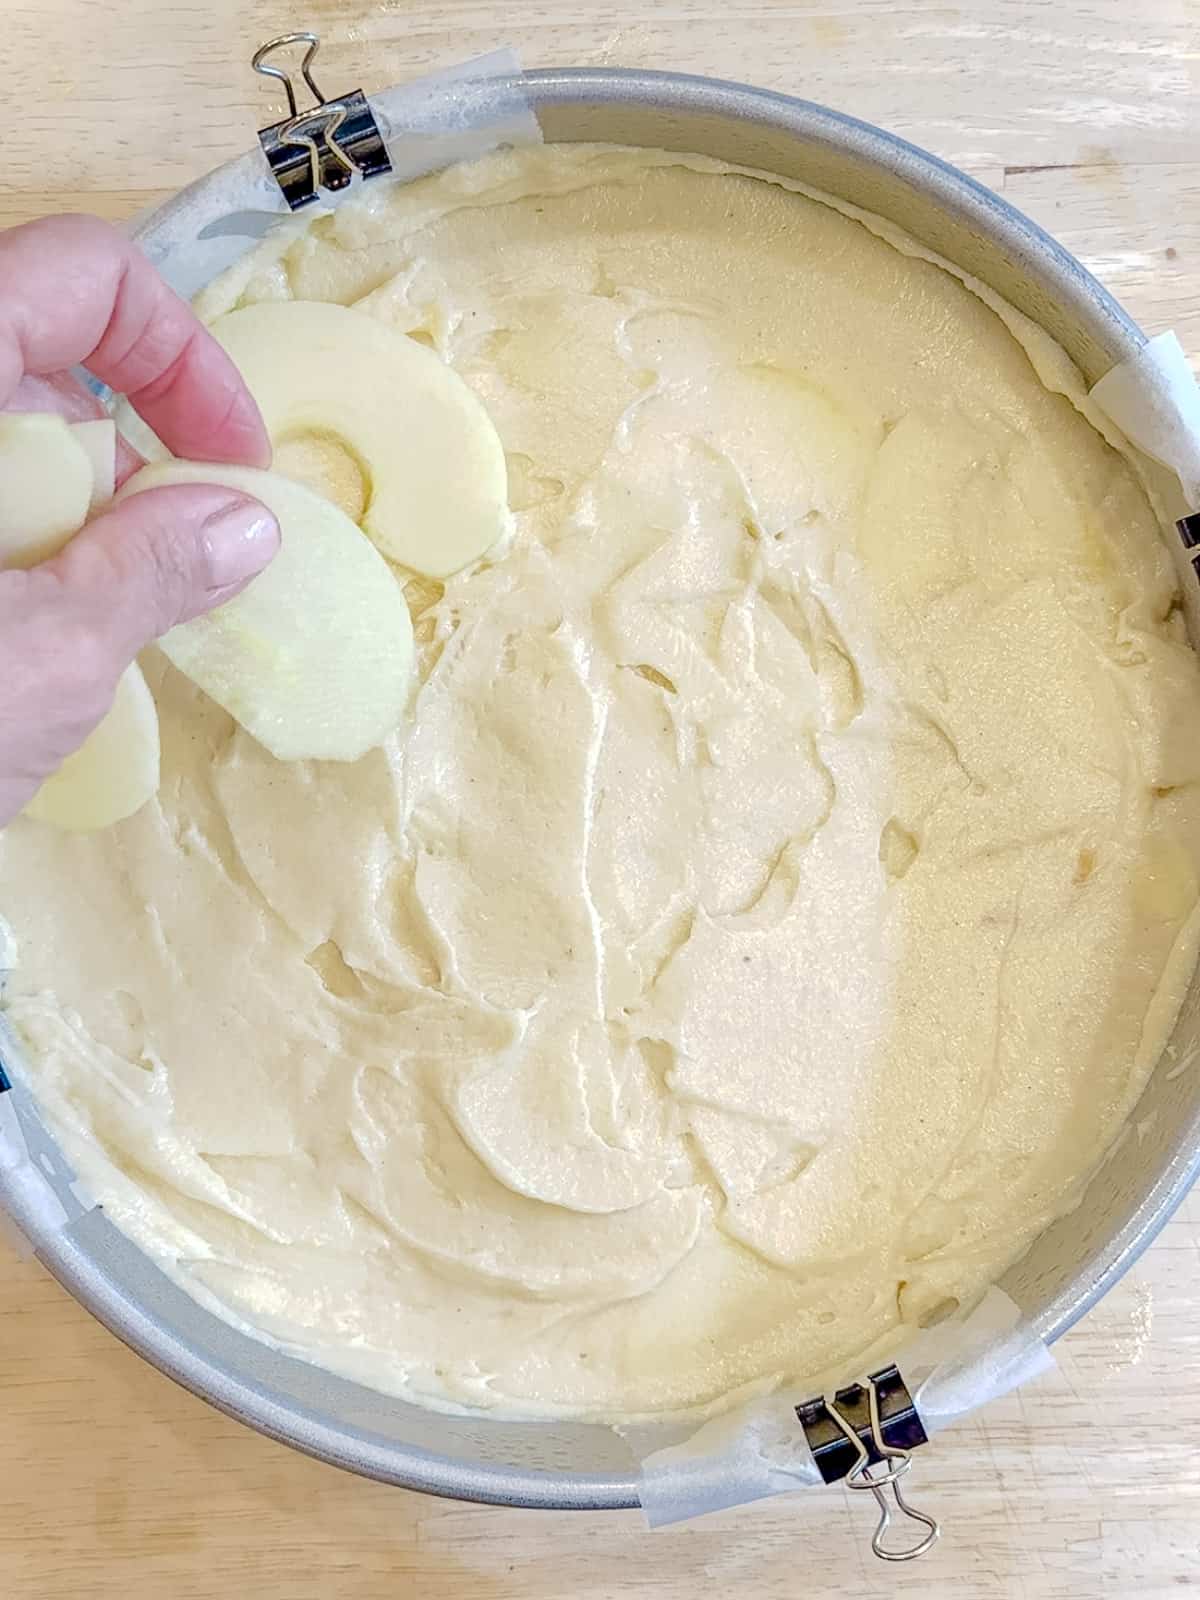 Placing apple slices on top of apple cake before baking.